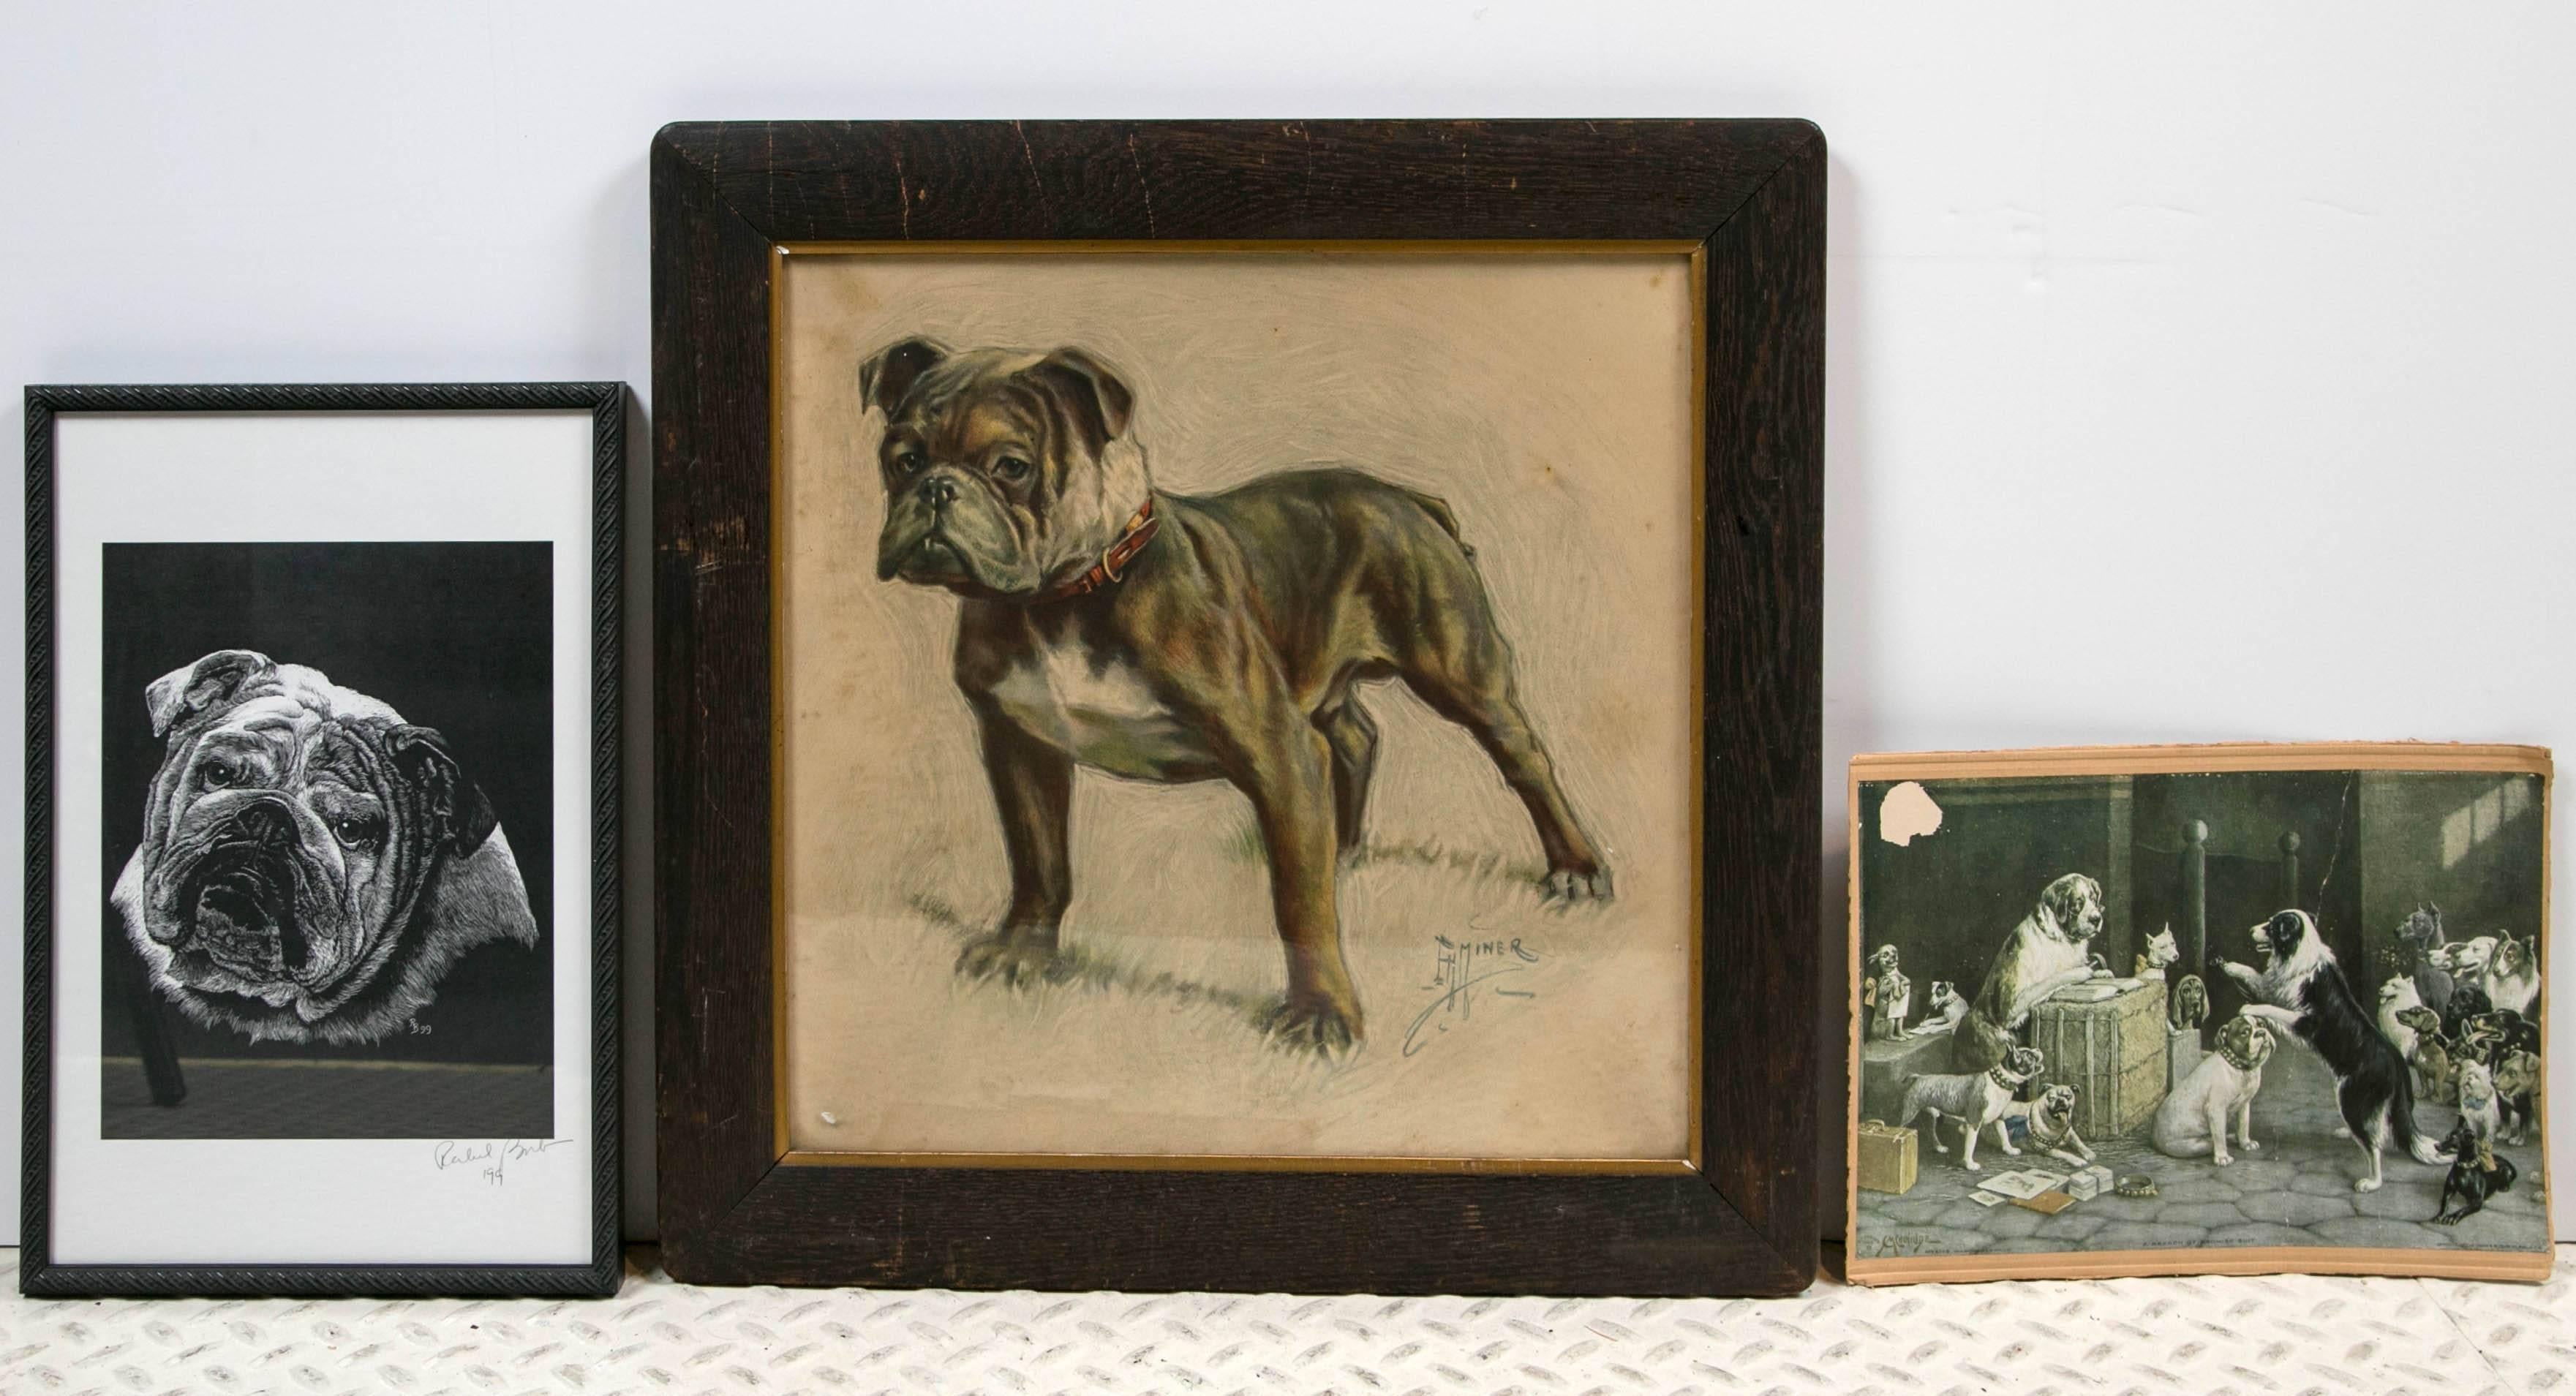 A good start to any bulldog collection, this set includes a hand-drawn portrait by HH Miner, a court scene 